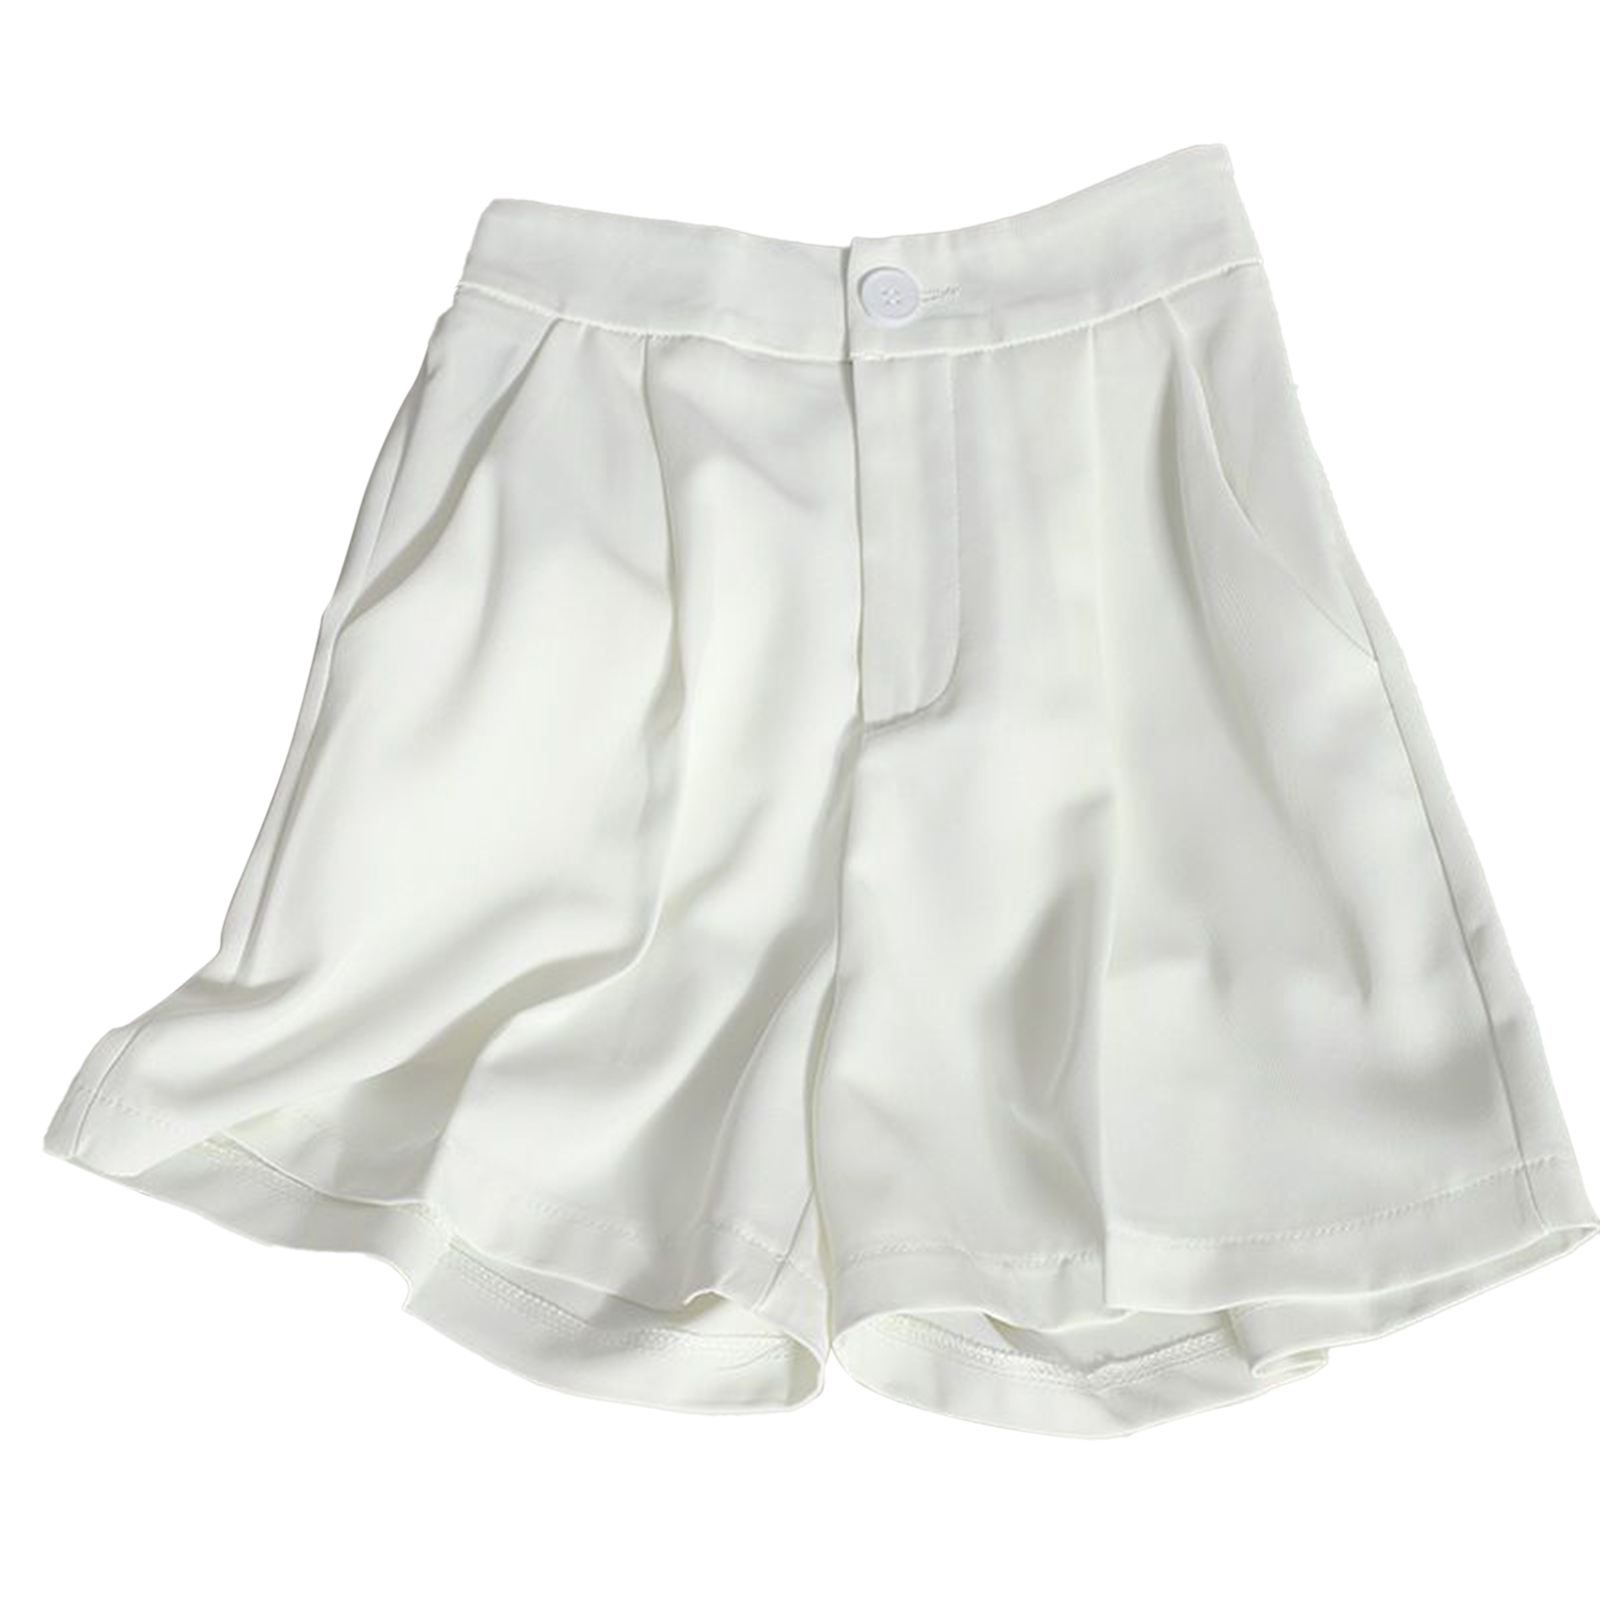 Women Suit Shorts Summer High Waist Solid Color Casual Straight Wide-leg Pants With Pockets White XL